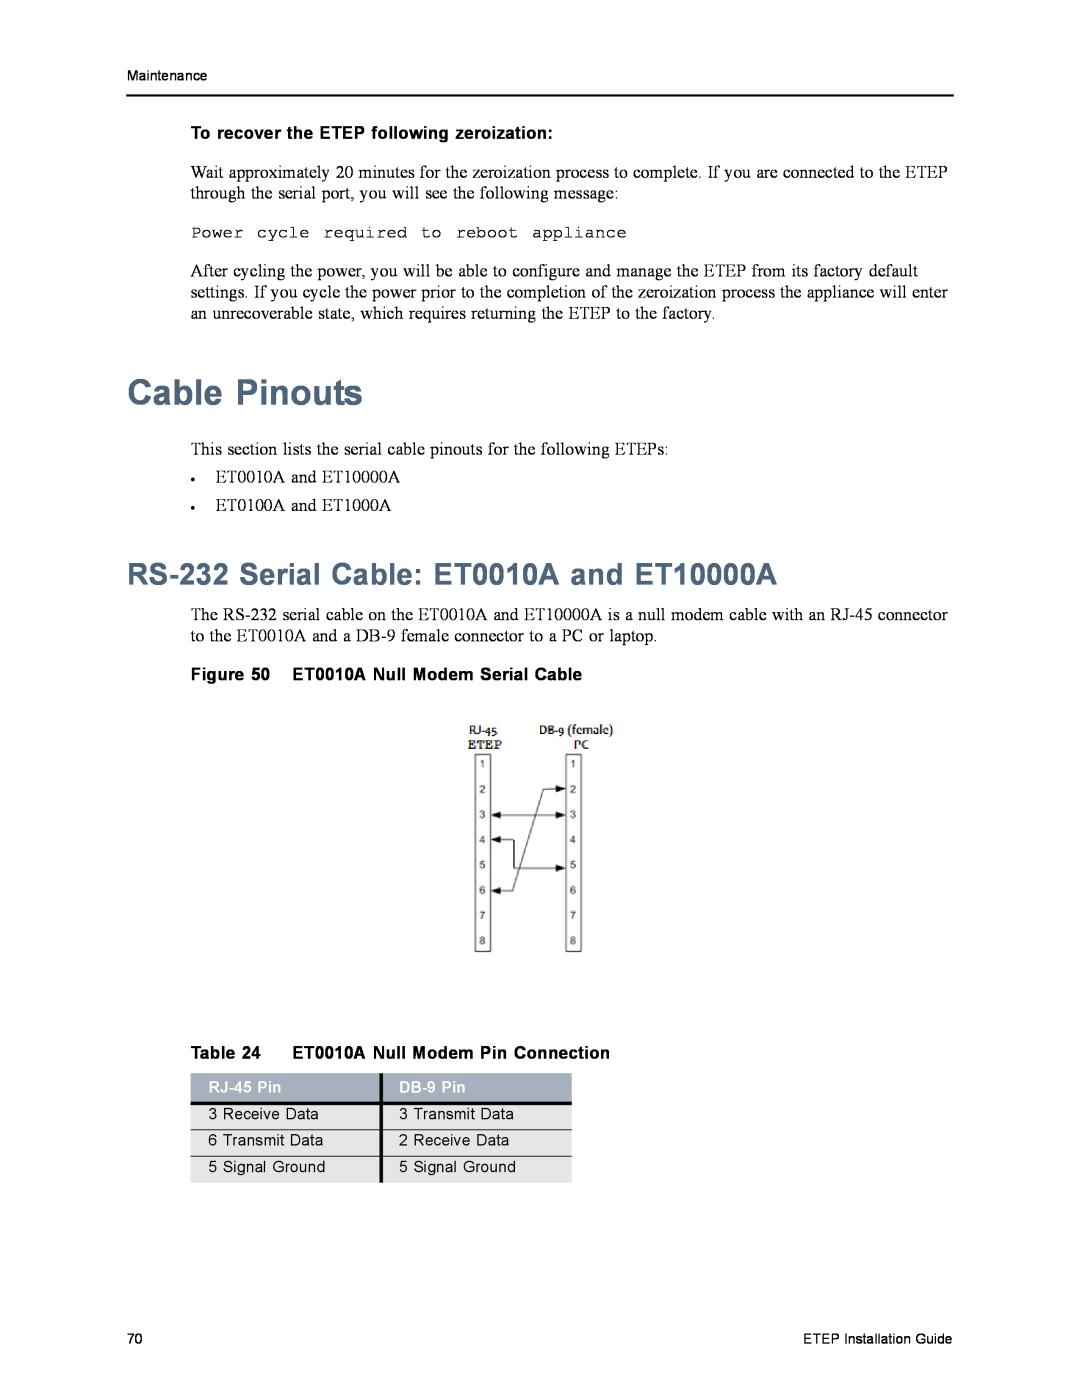 Black Box ET1000A manual Cable Pinouts, RS-232 Serial Cable ET0010A and ET10000A, To recover the ETEP following zeroization 